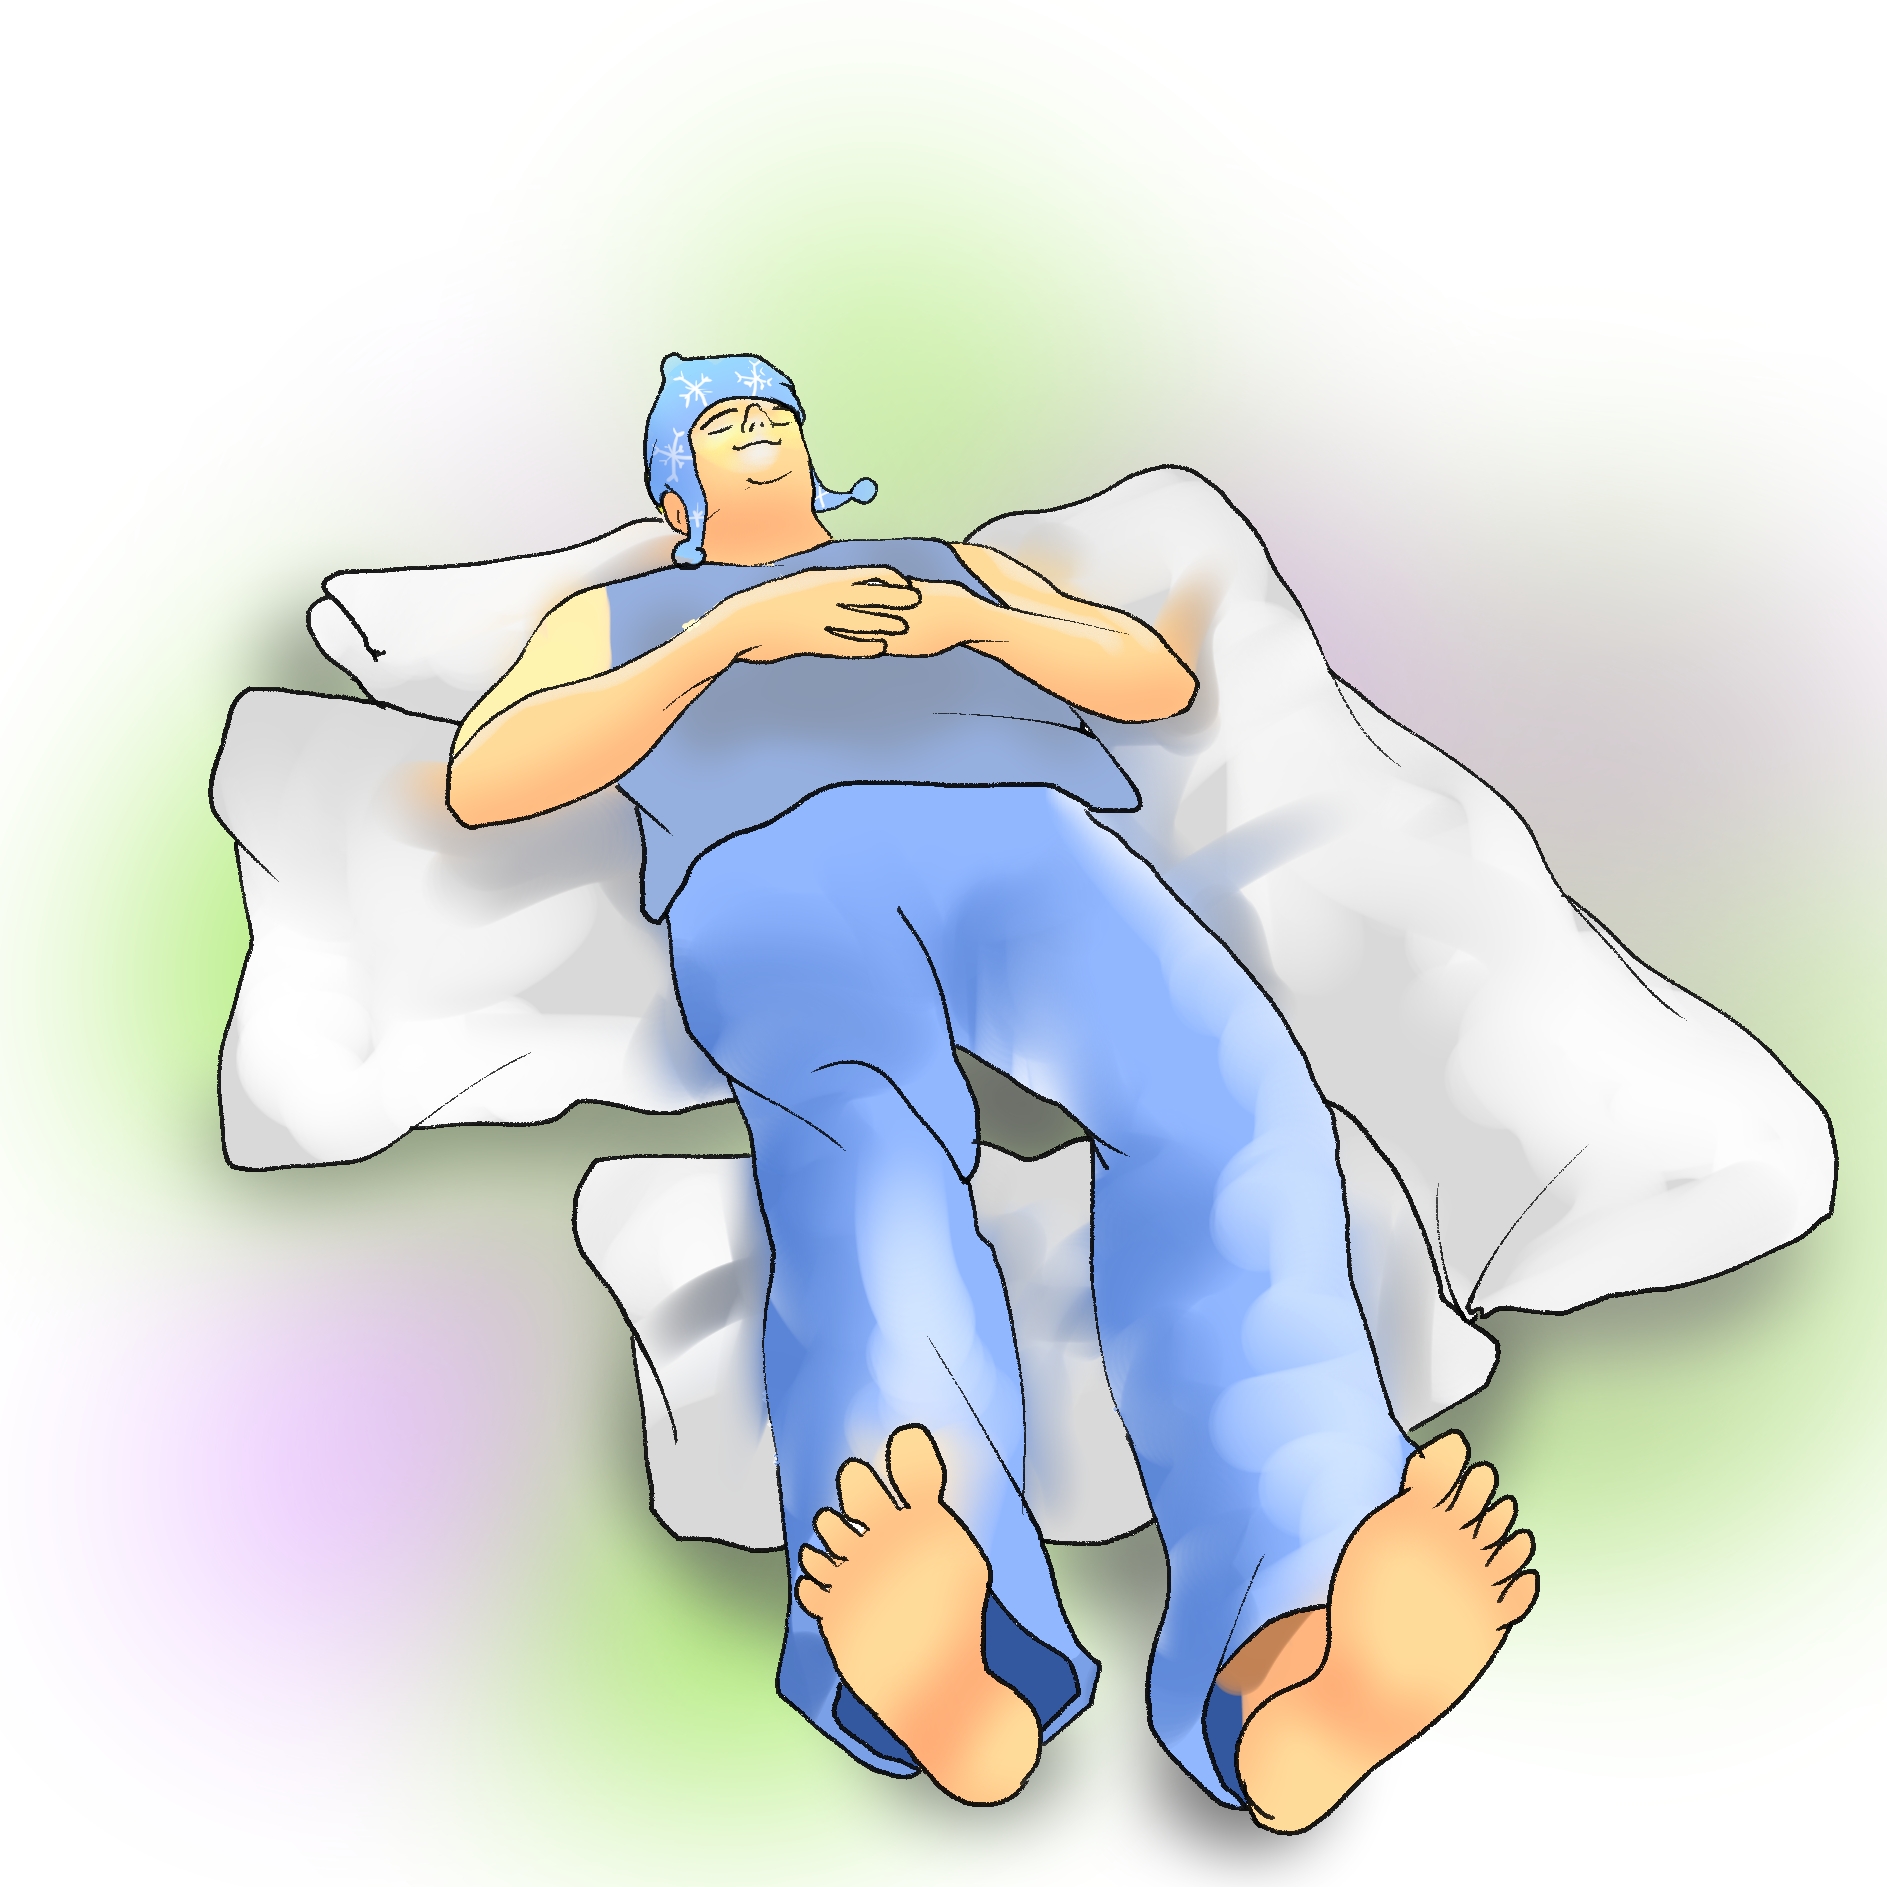 Do you keep a pillow between your legs while sleeping? Here is